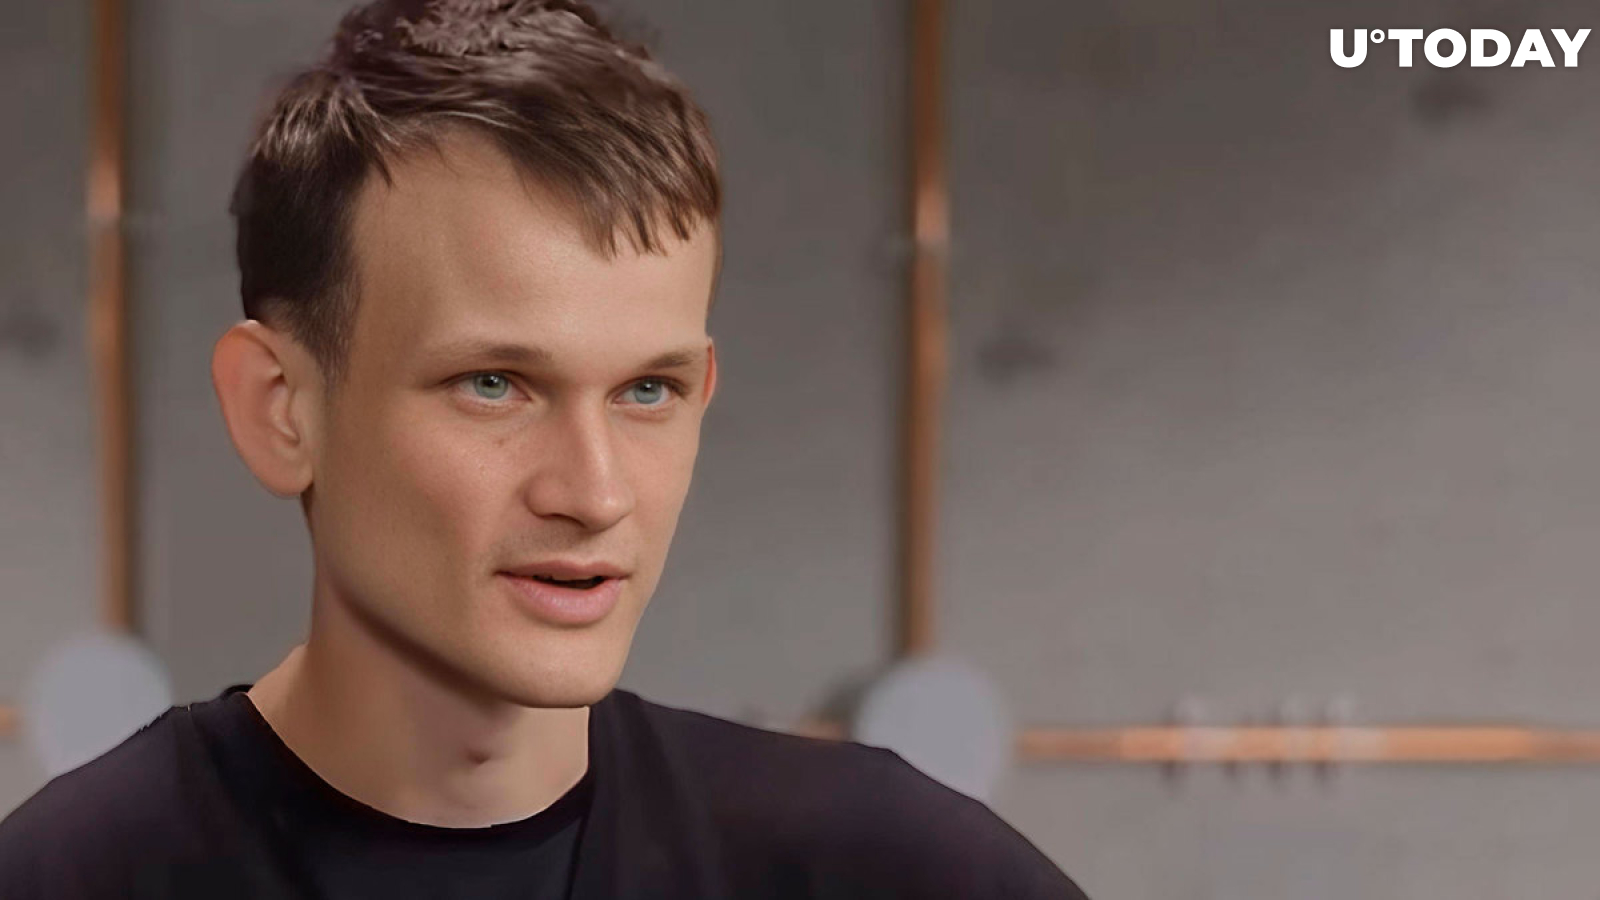 Ethereum’s Vitalik Buterin Spills Beans on Crypto and AI Challenges